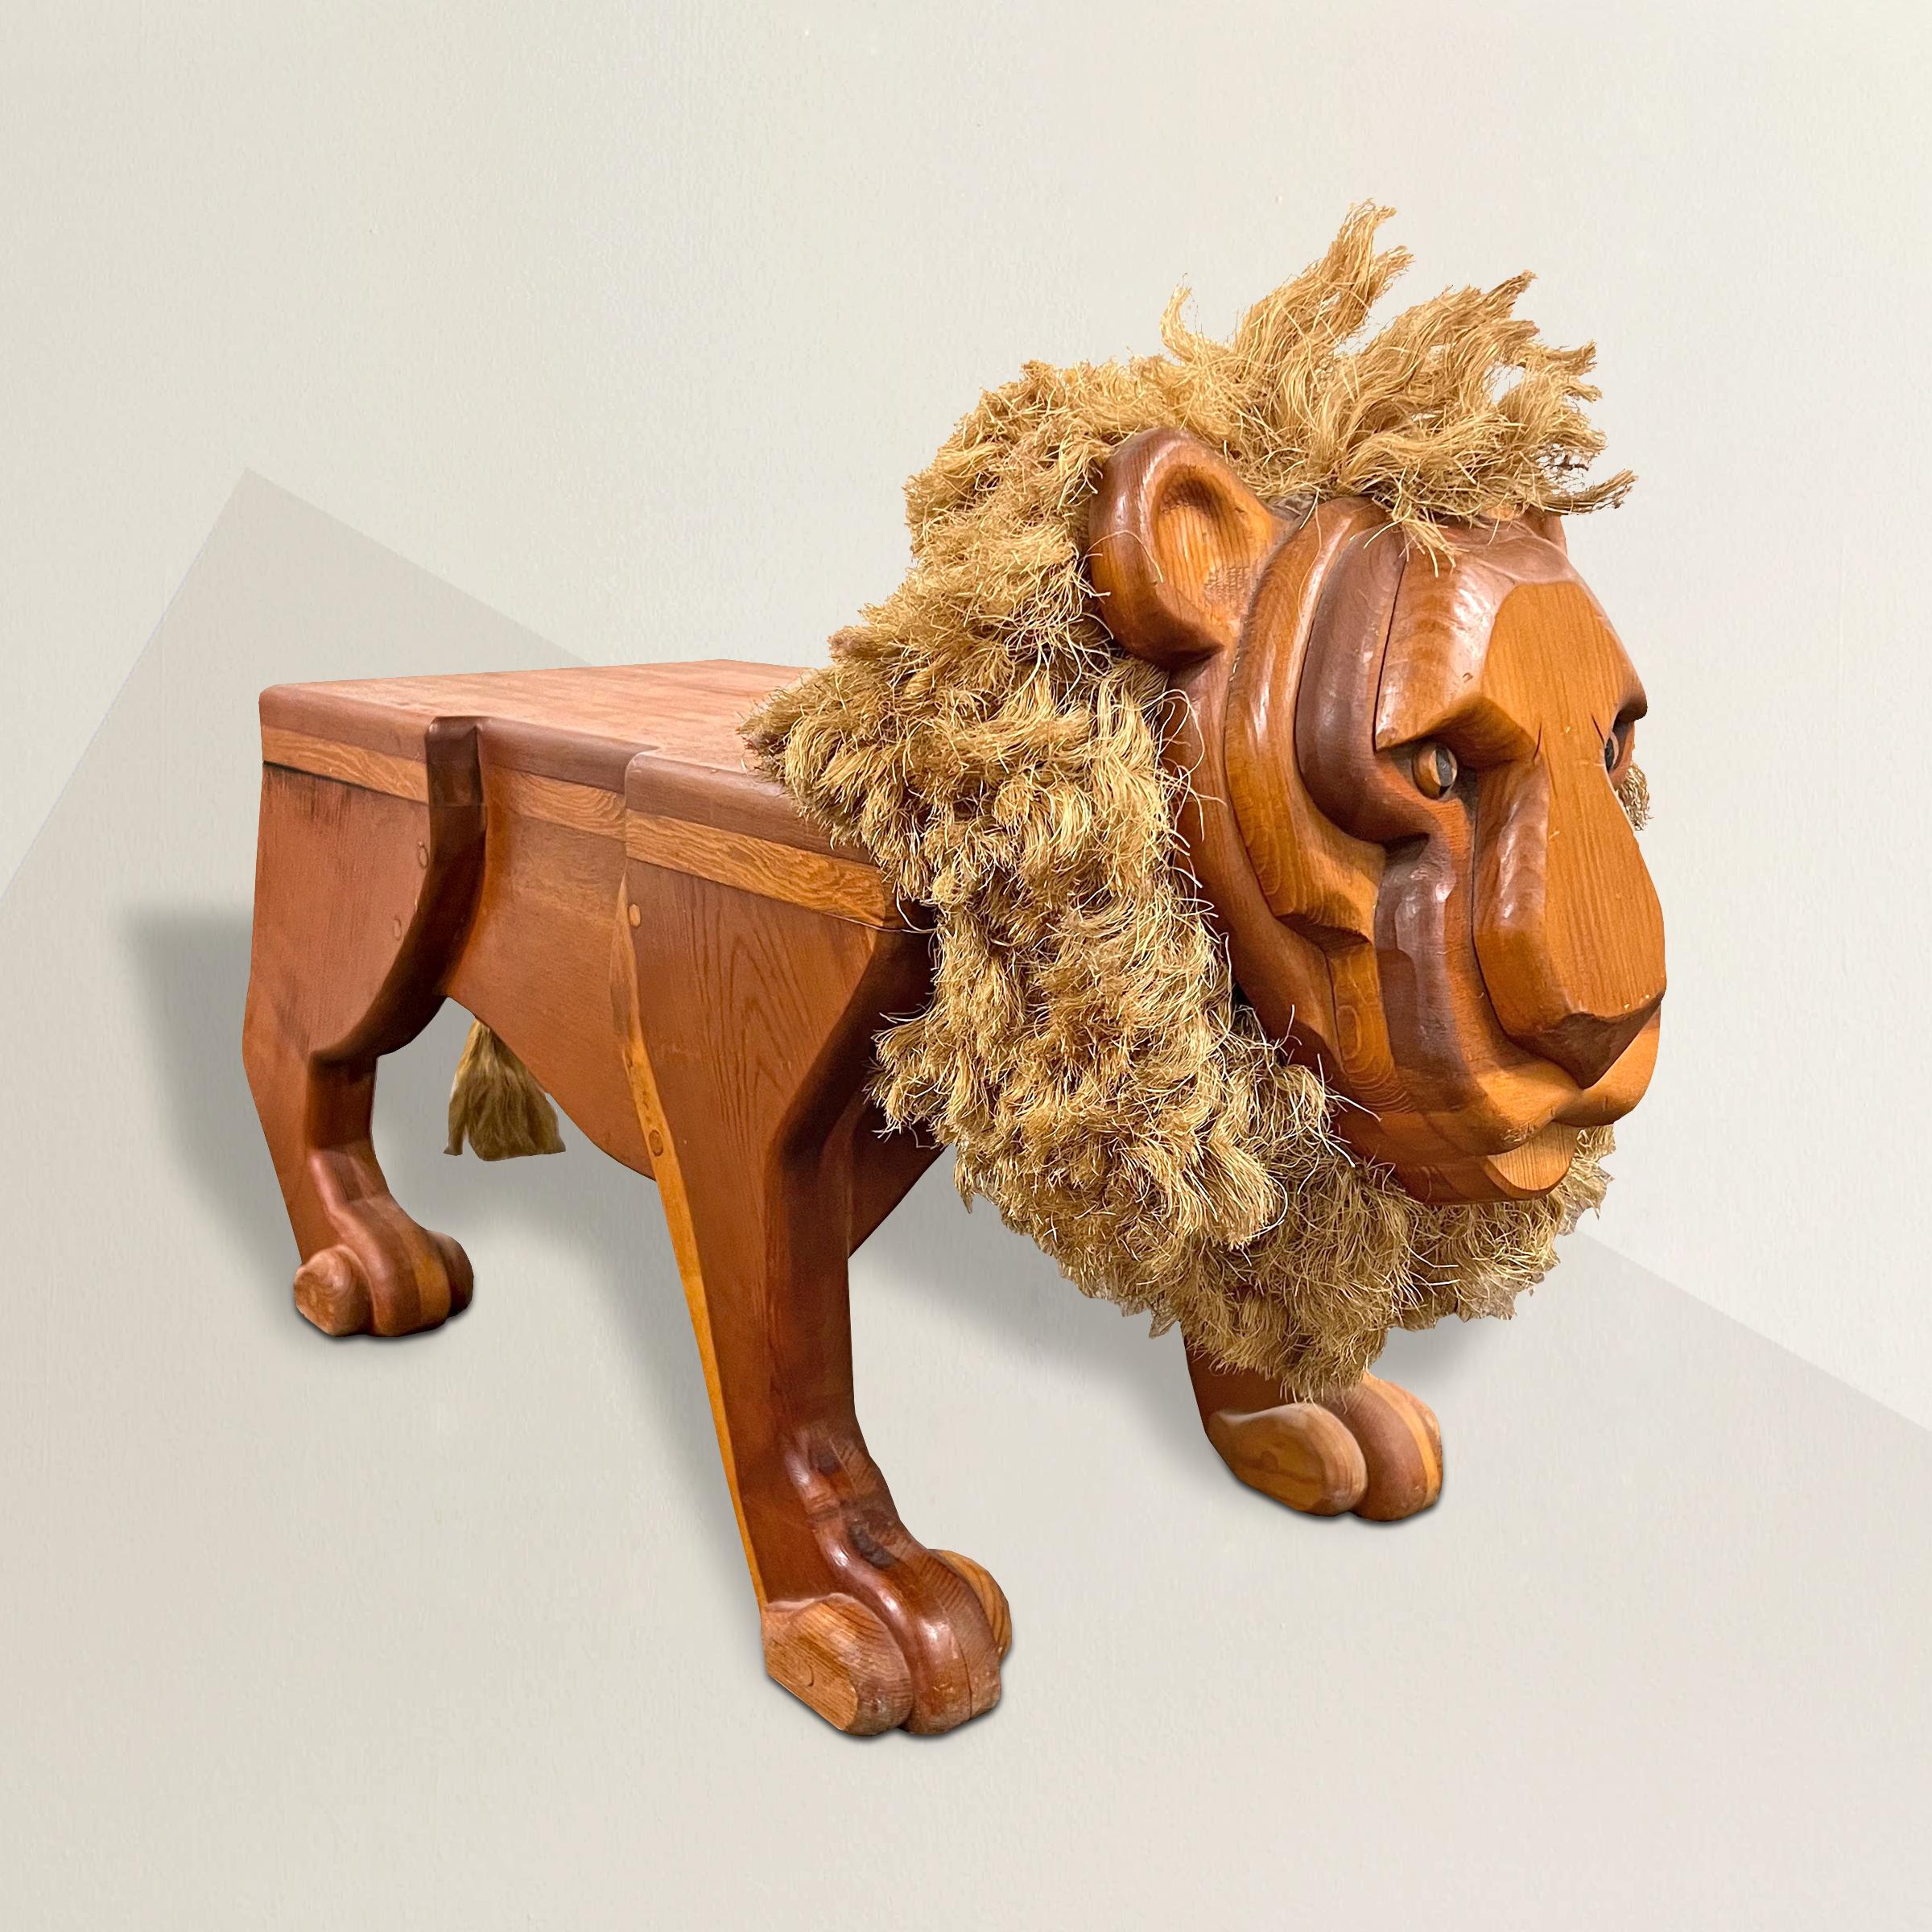 A whimsical and playful mid-20th century American hand-carved pine lion stool with a full mane and rope tail, perfect as a step stool or as a side table or foot stool next to your favorite armchair.